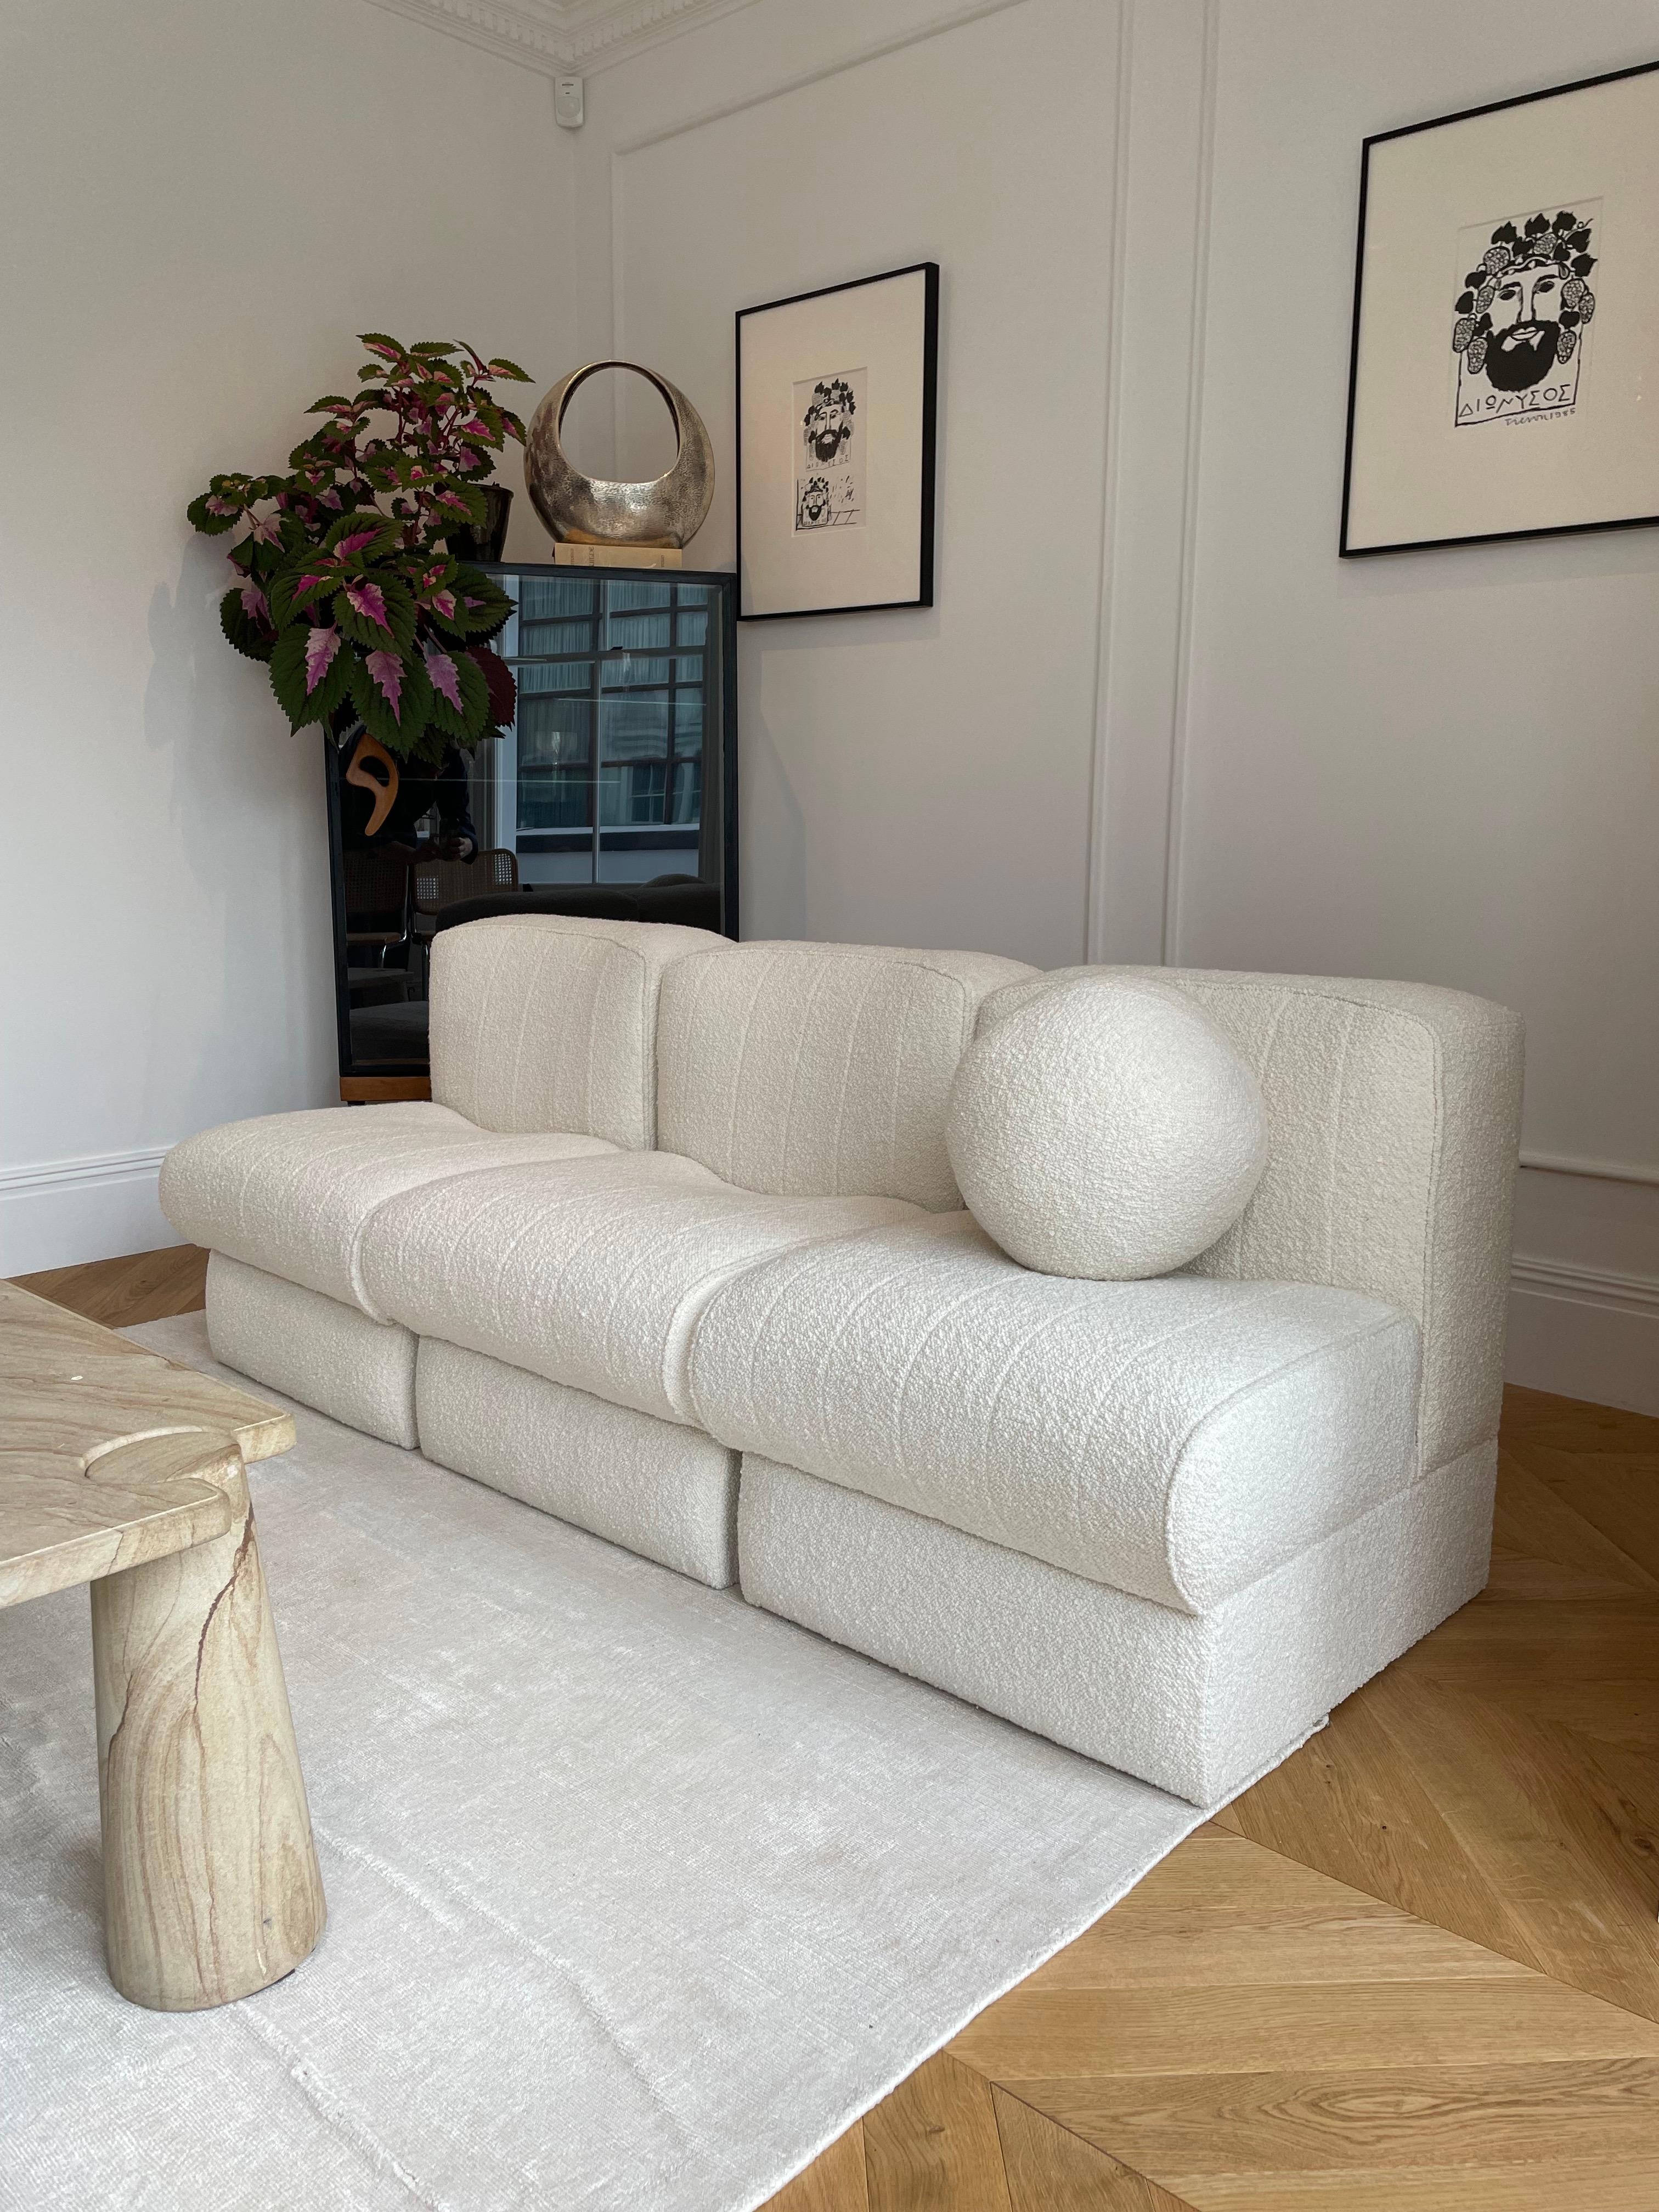 Modular Sofa Straight Units by Tito Agnoli In Excellent Condition For Sale In London, England